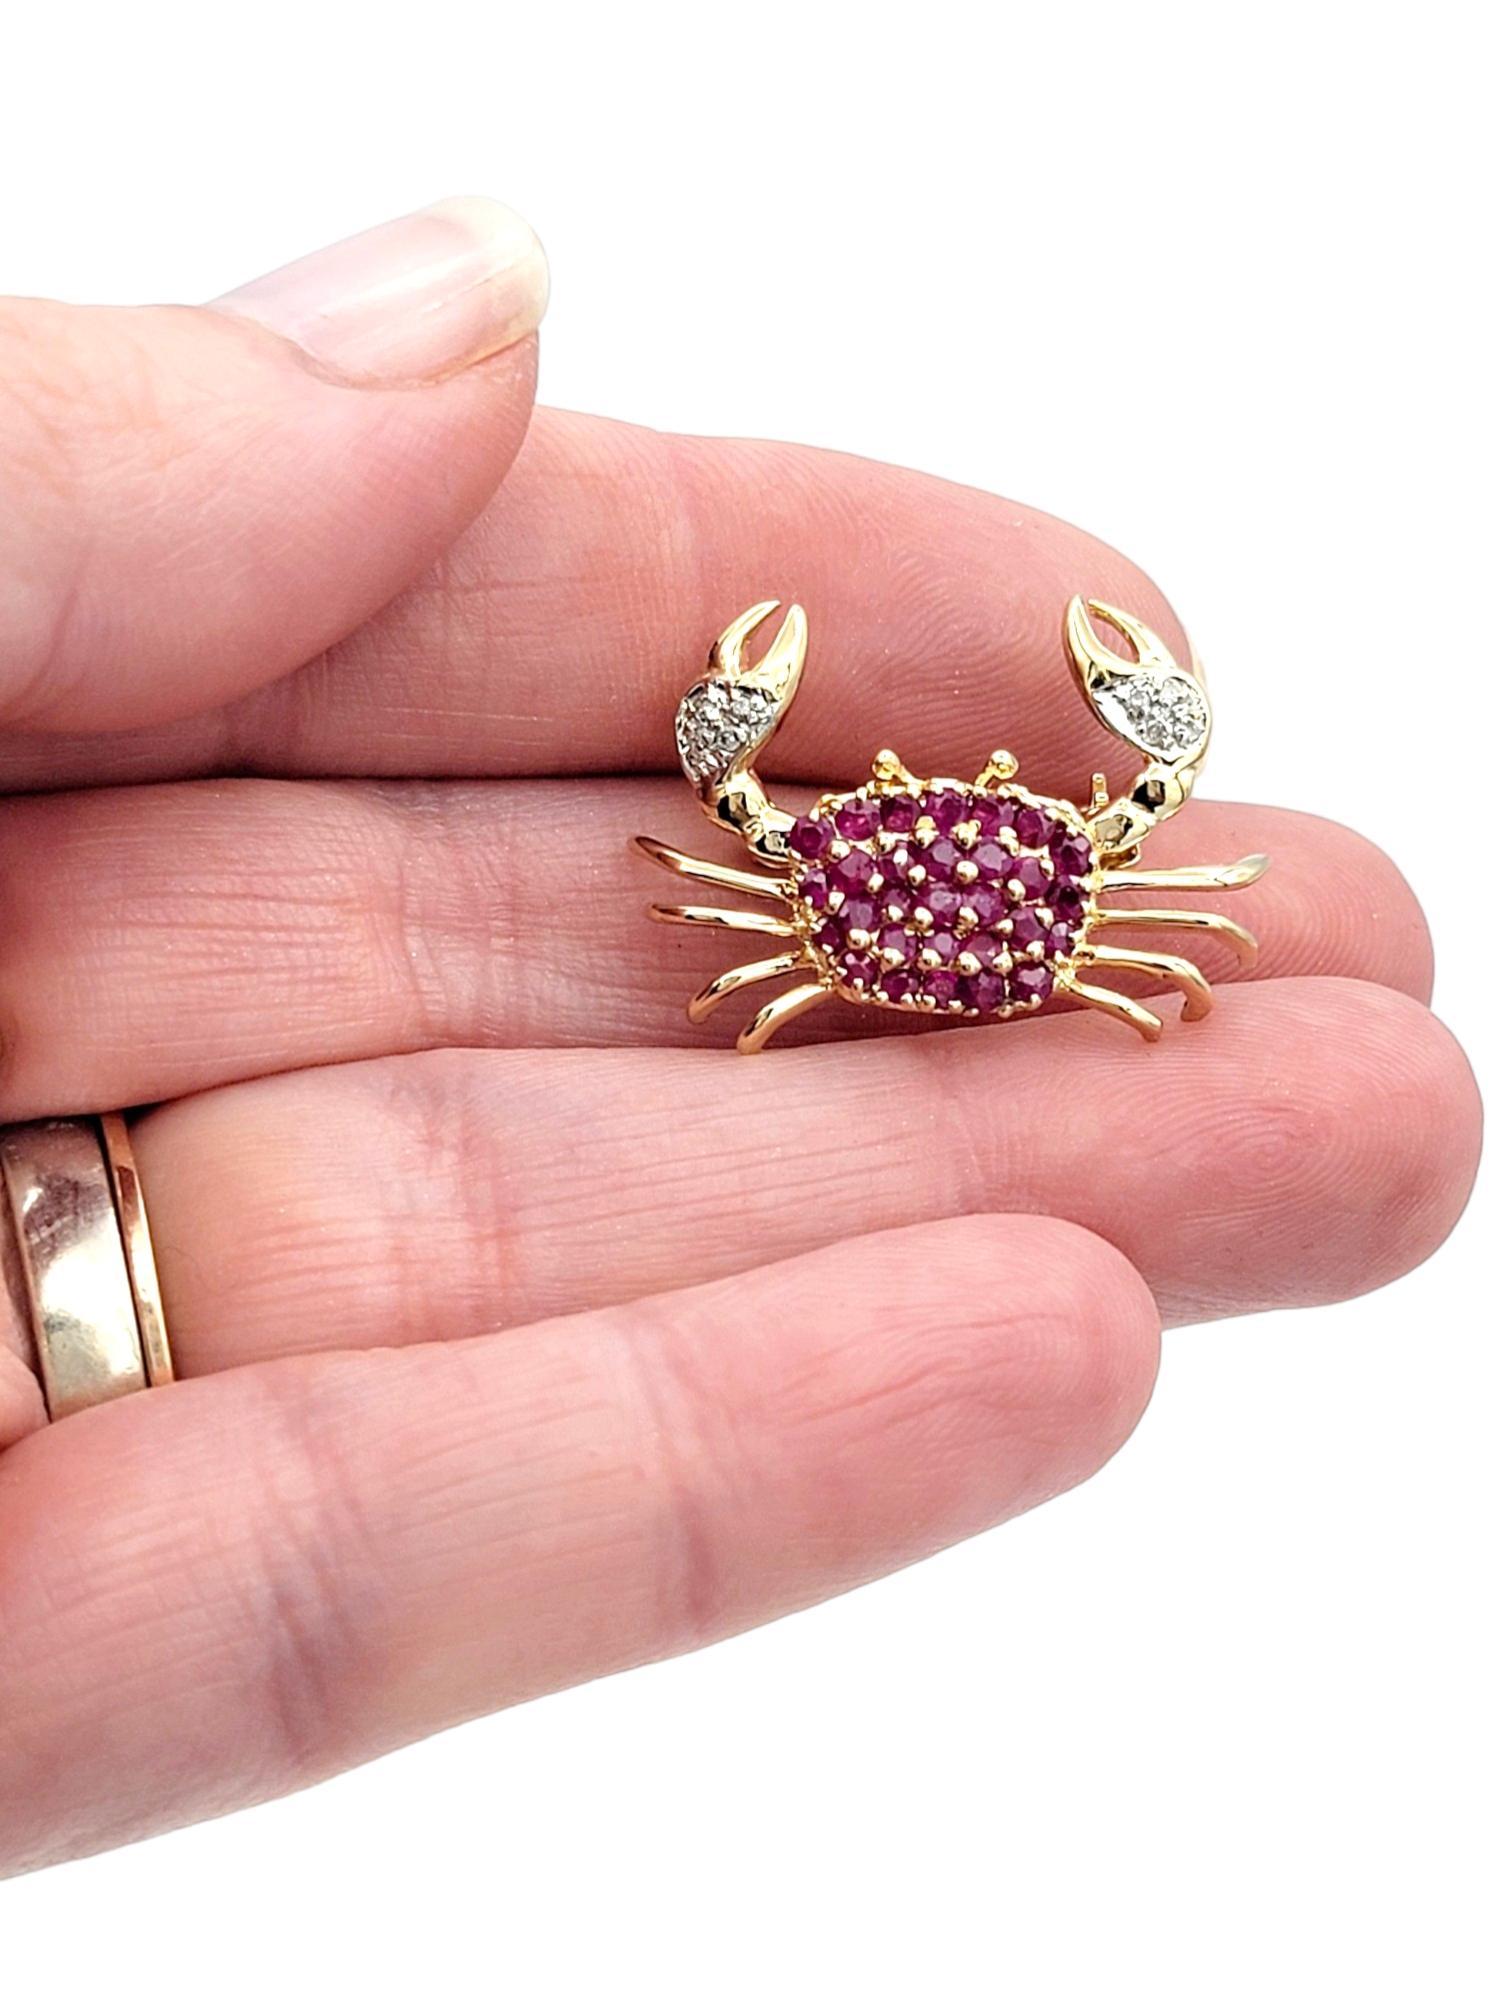 Ruby and Diamond Small Crab Design Brooch / Pendant Set in 14 Karat Yellow Gold In Good Condition For Sale In Scottsdale, AZ